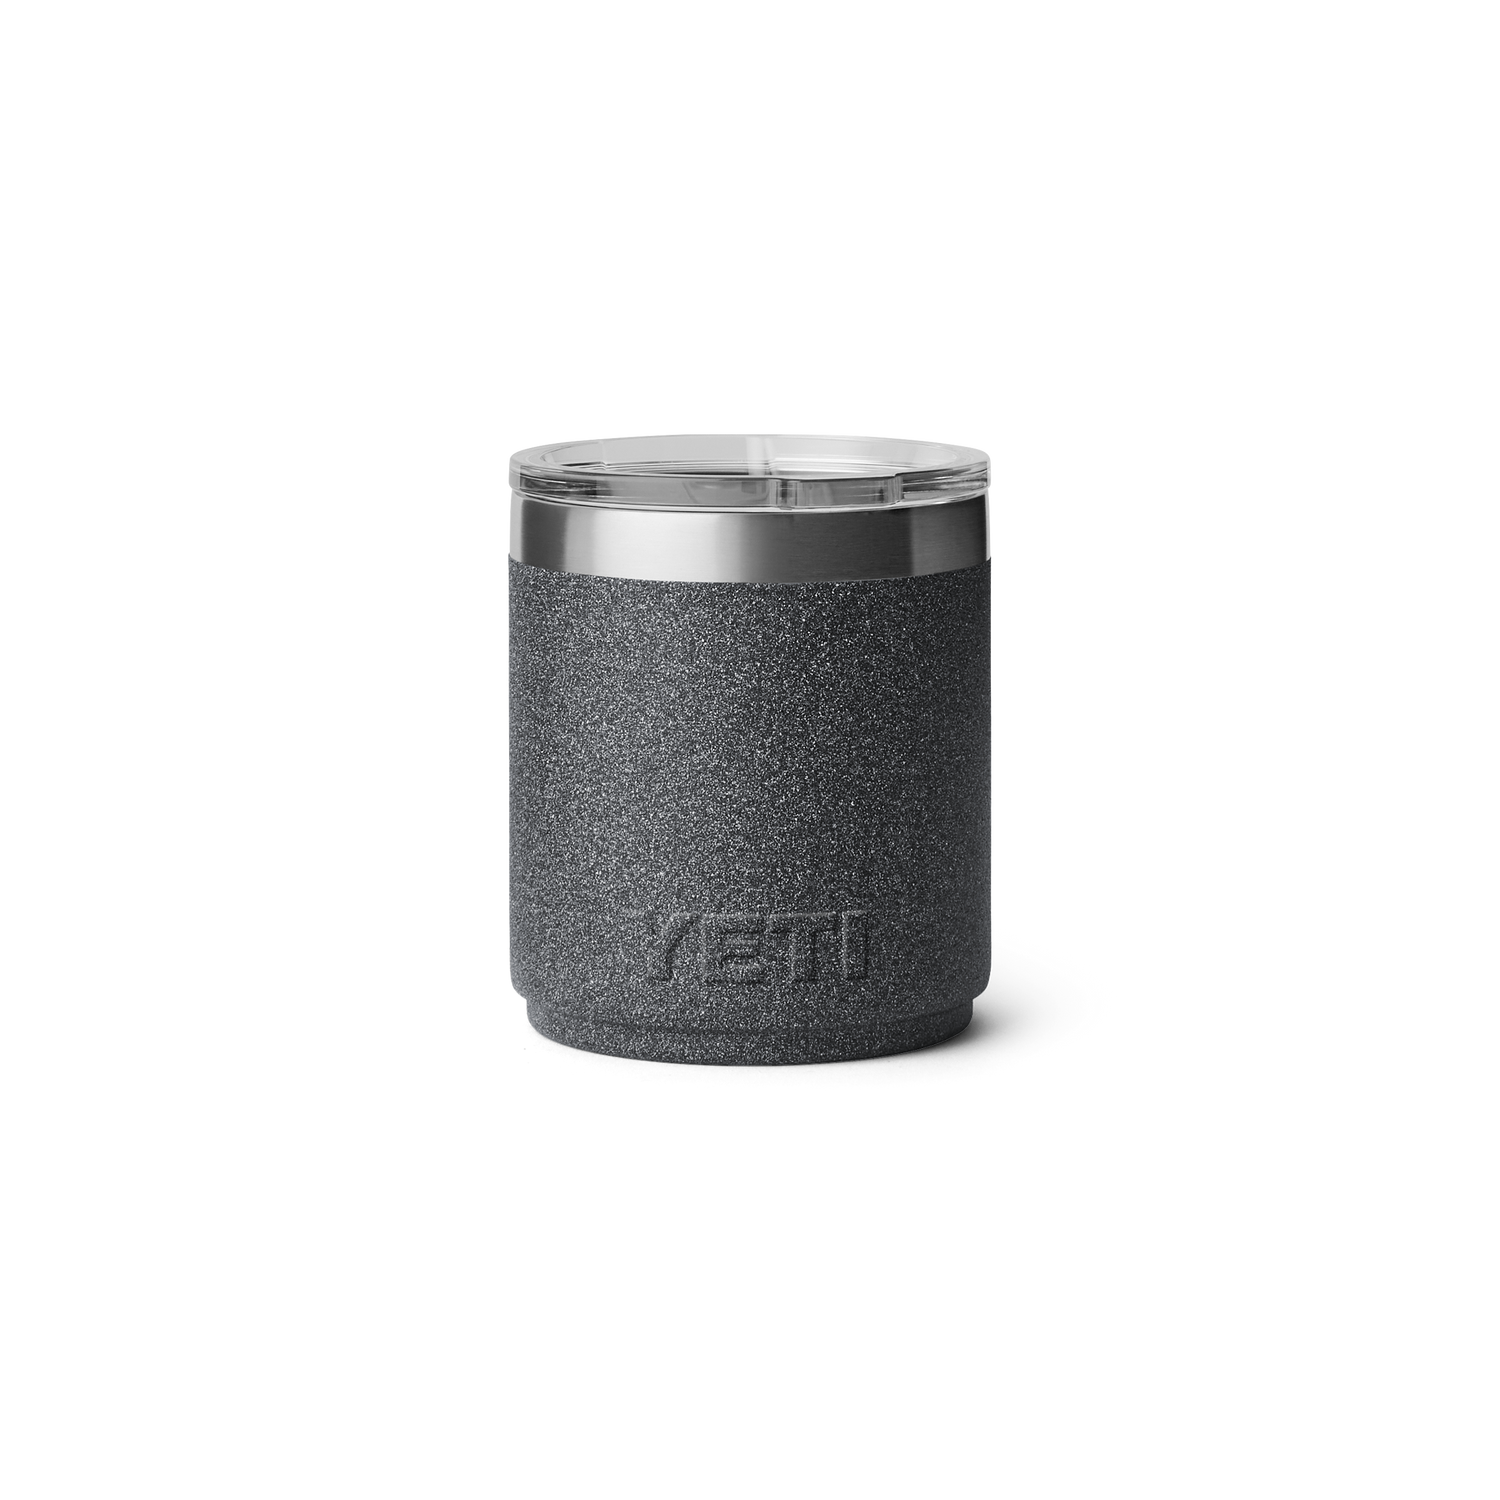 YETI 10 oz Stackable Lowball with Magslider™ lid Black Stone